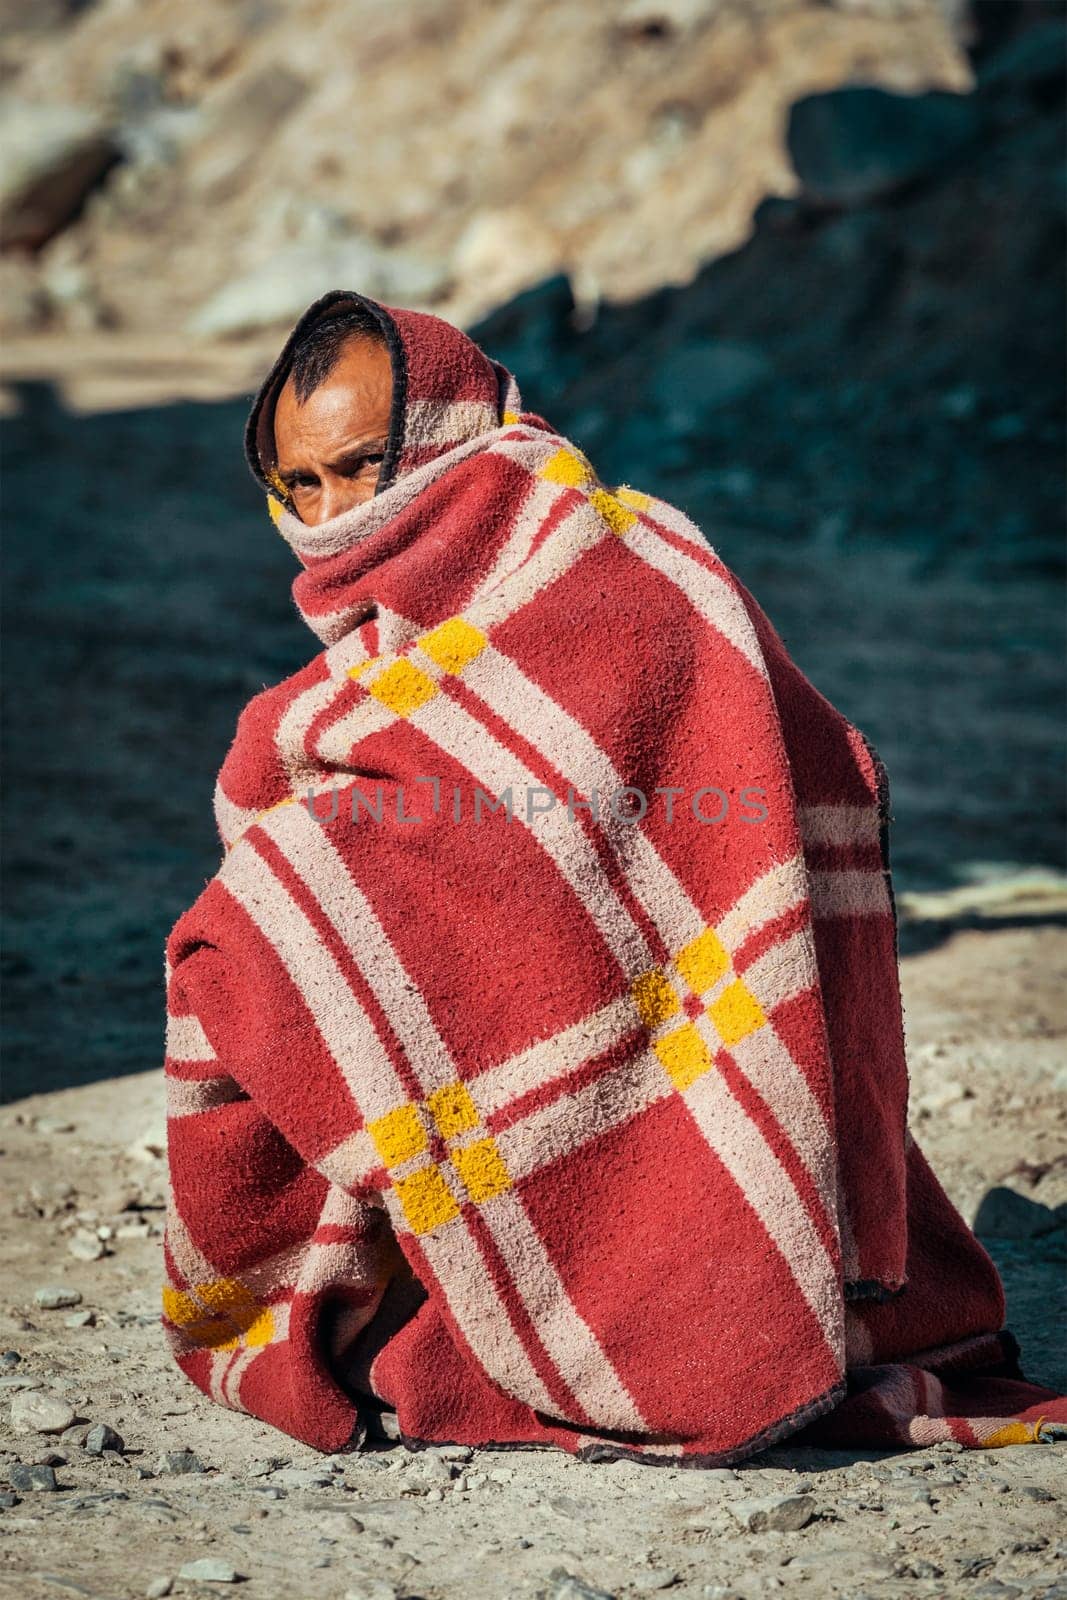 SARCHU, INDIA - SEPTEMBER 2, 2011: Indian man muffled in blanket on cold morning on Manali-Leh road in Himalayas in Ladakh, India